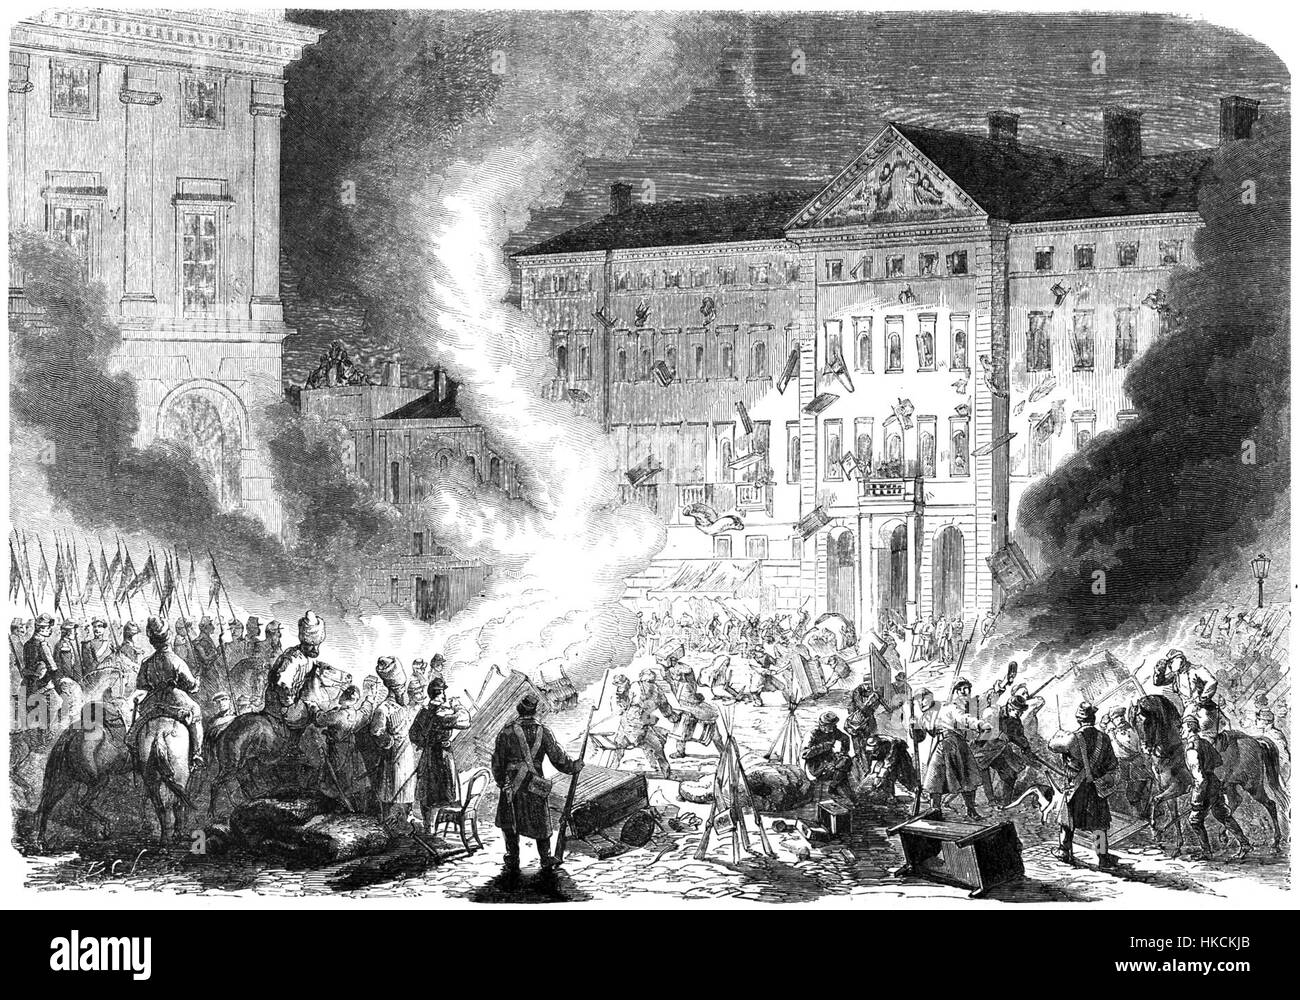 Russian Imperial Army demolishing Zamoyski Palace in Warsaw after assassination attempt 1863 Stock Photo